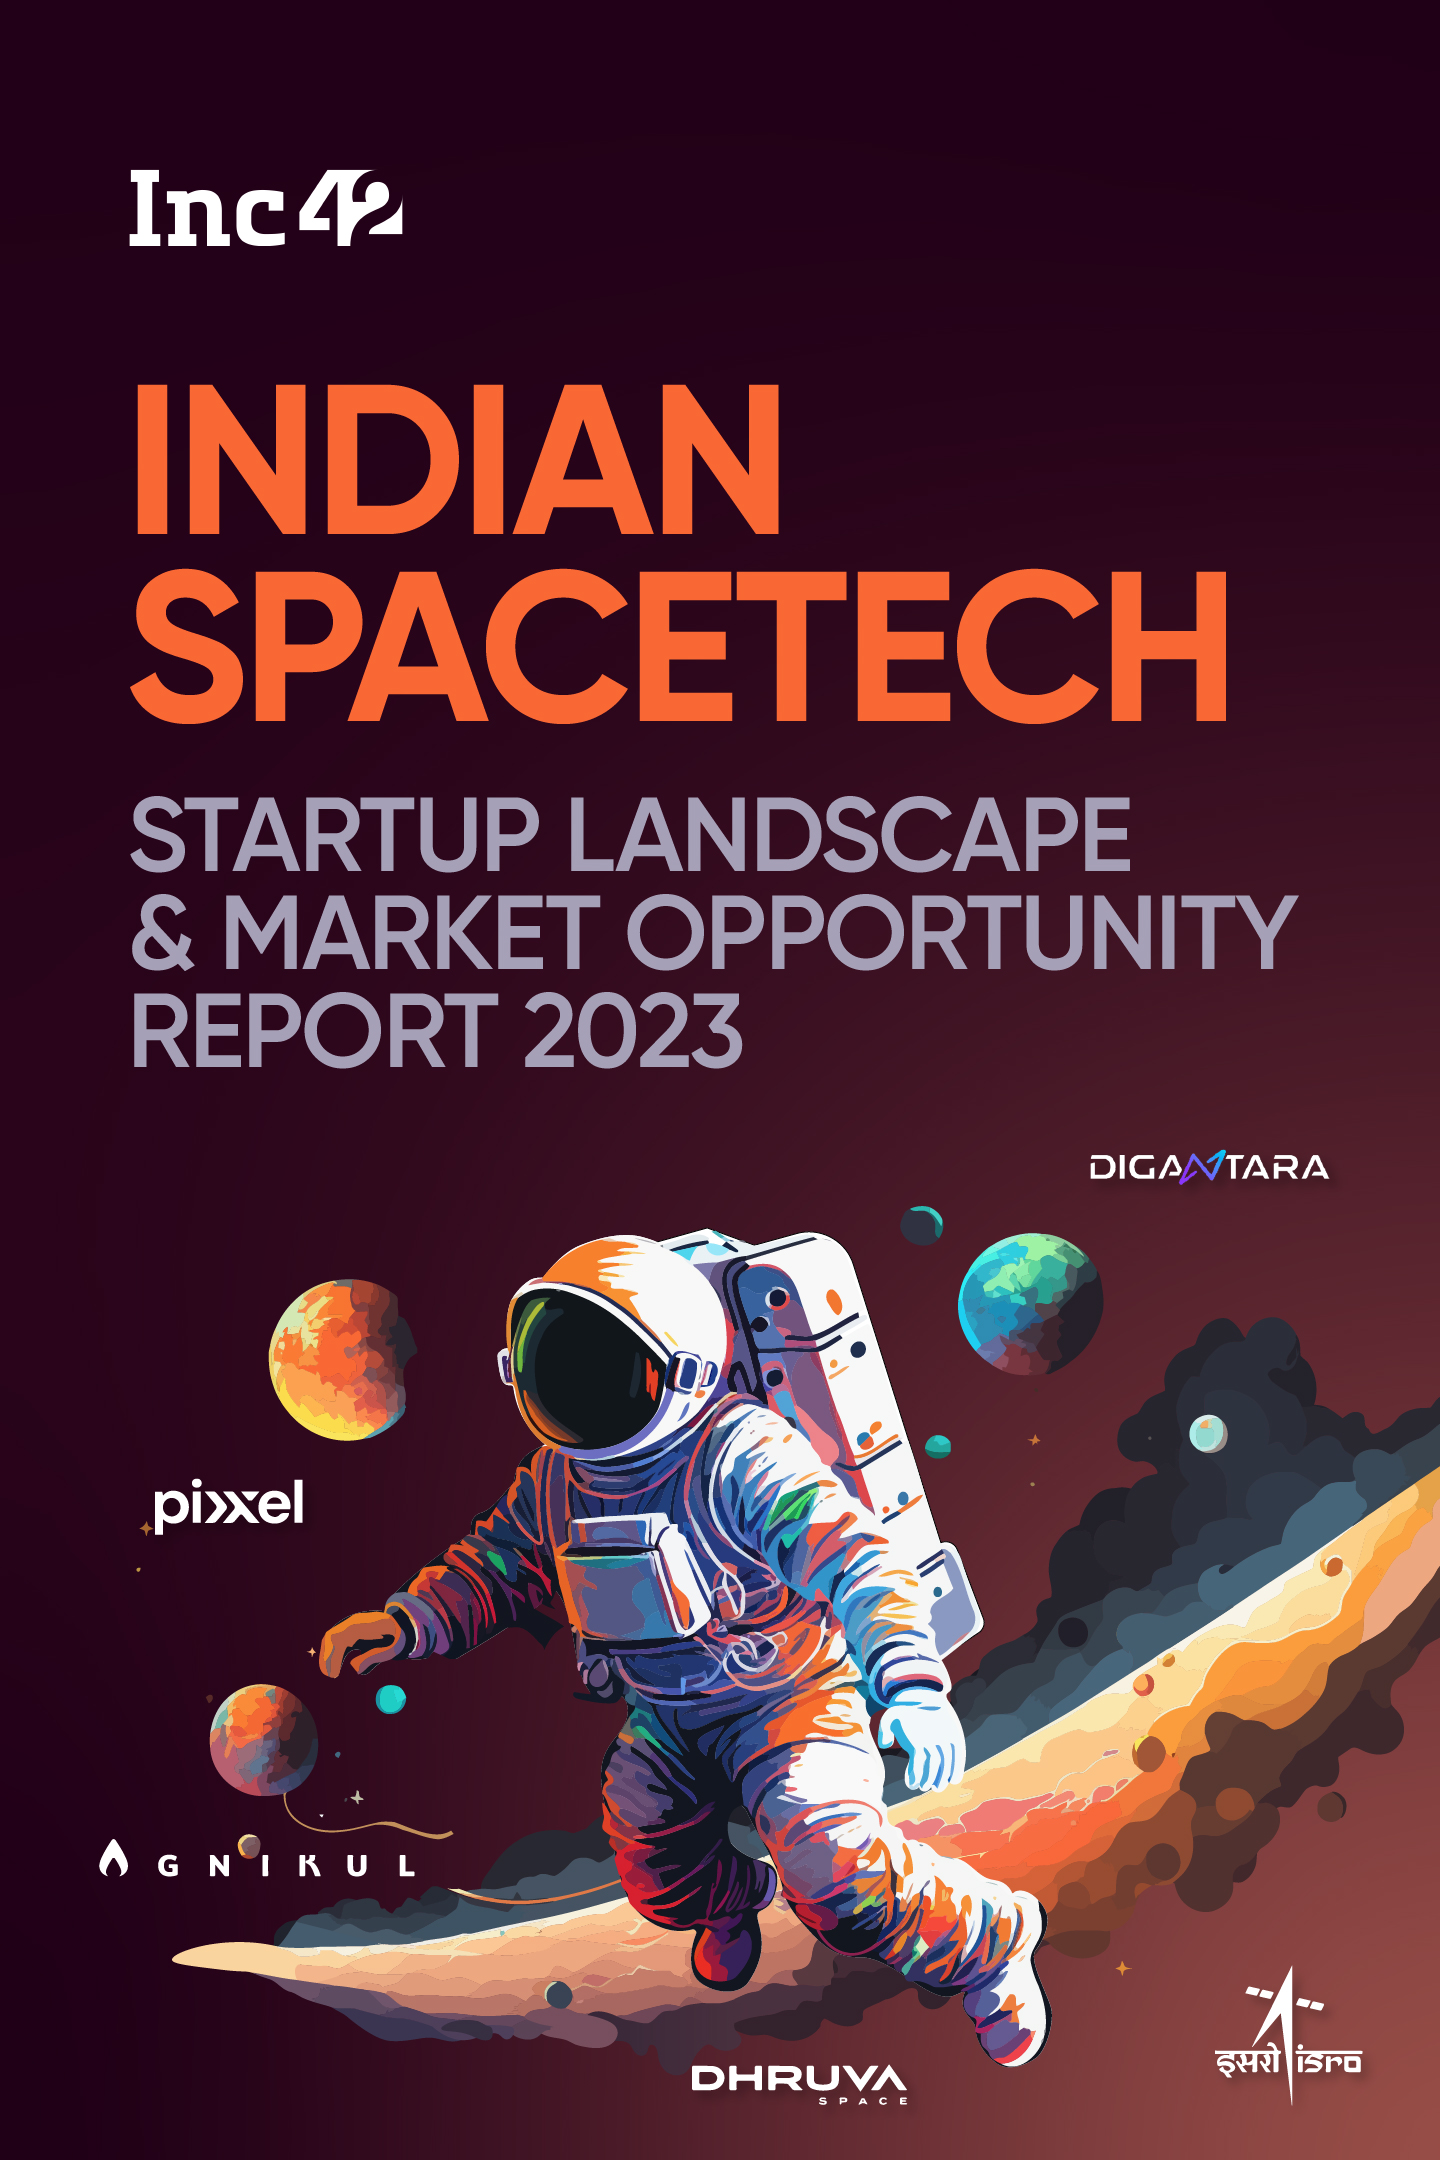 Indian Spacetech Startup Landscape & Market Opportunity Report 2023